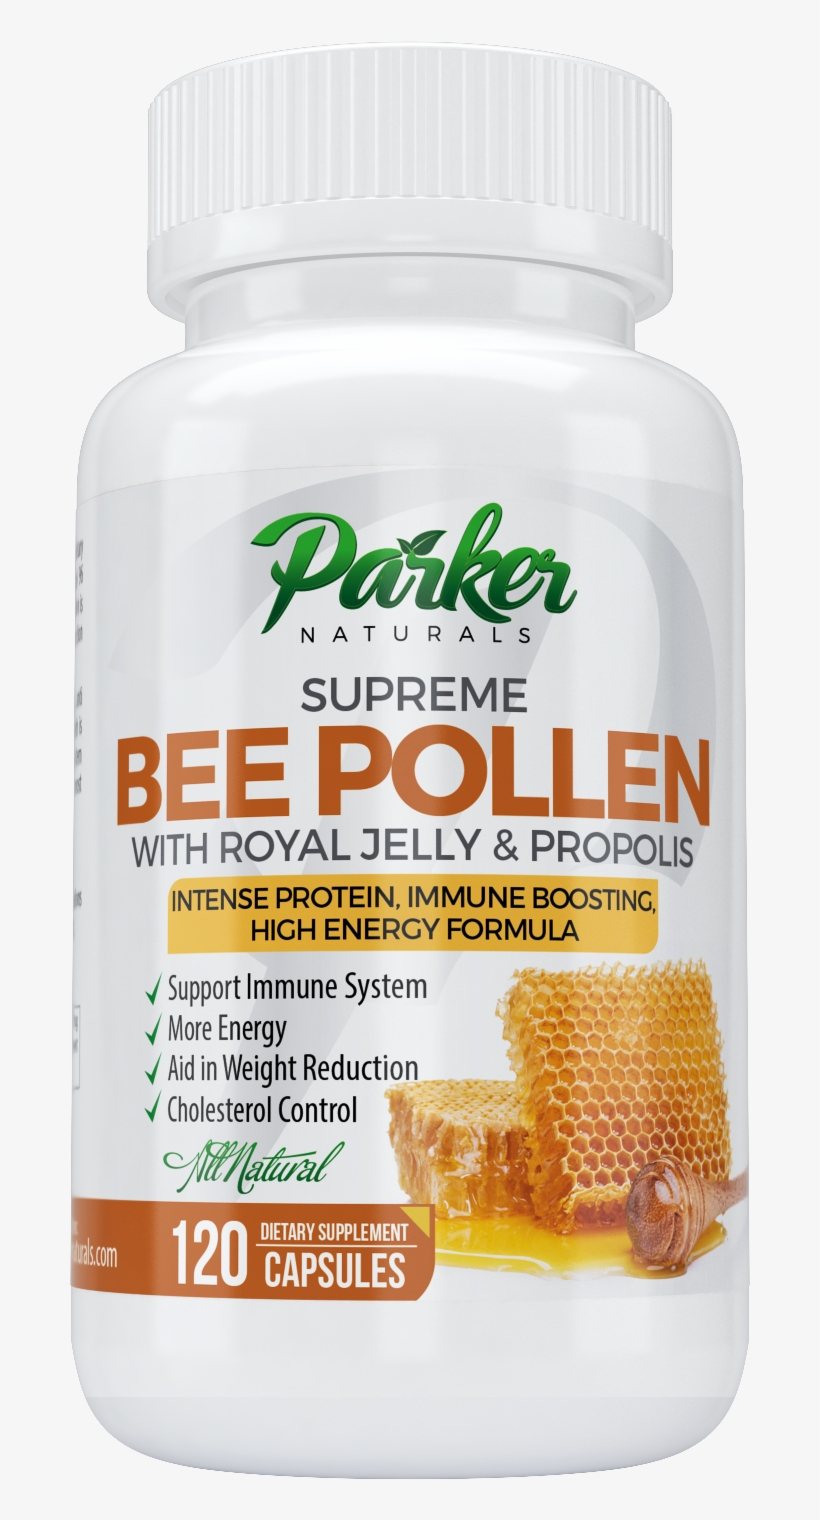 Best Bee Pollen, Royal Jelly And Propolis - Waffle, transparent png #9888585